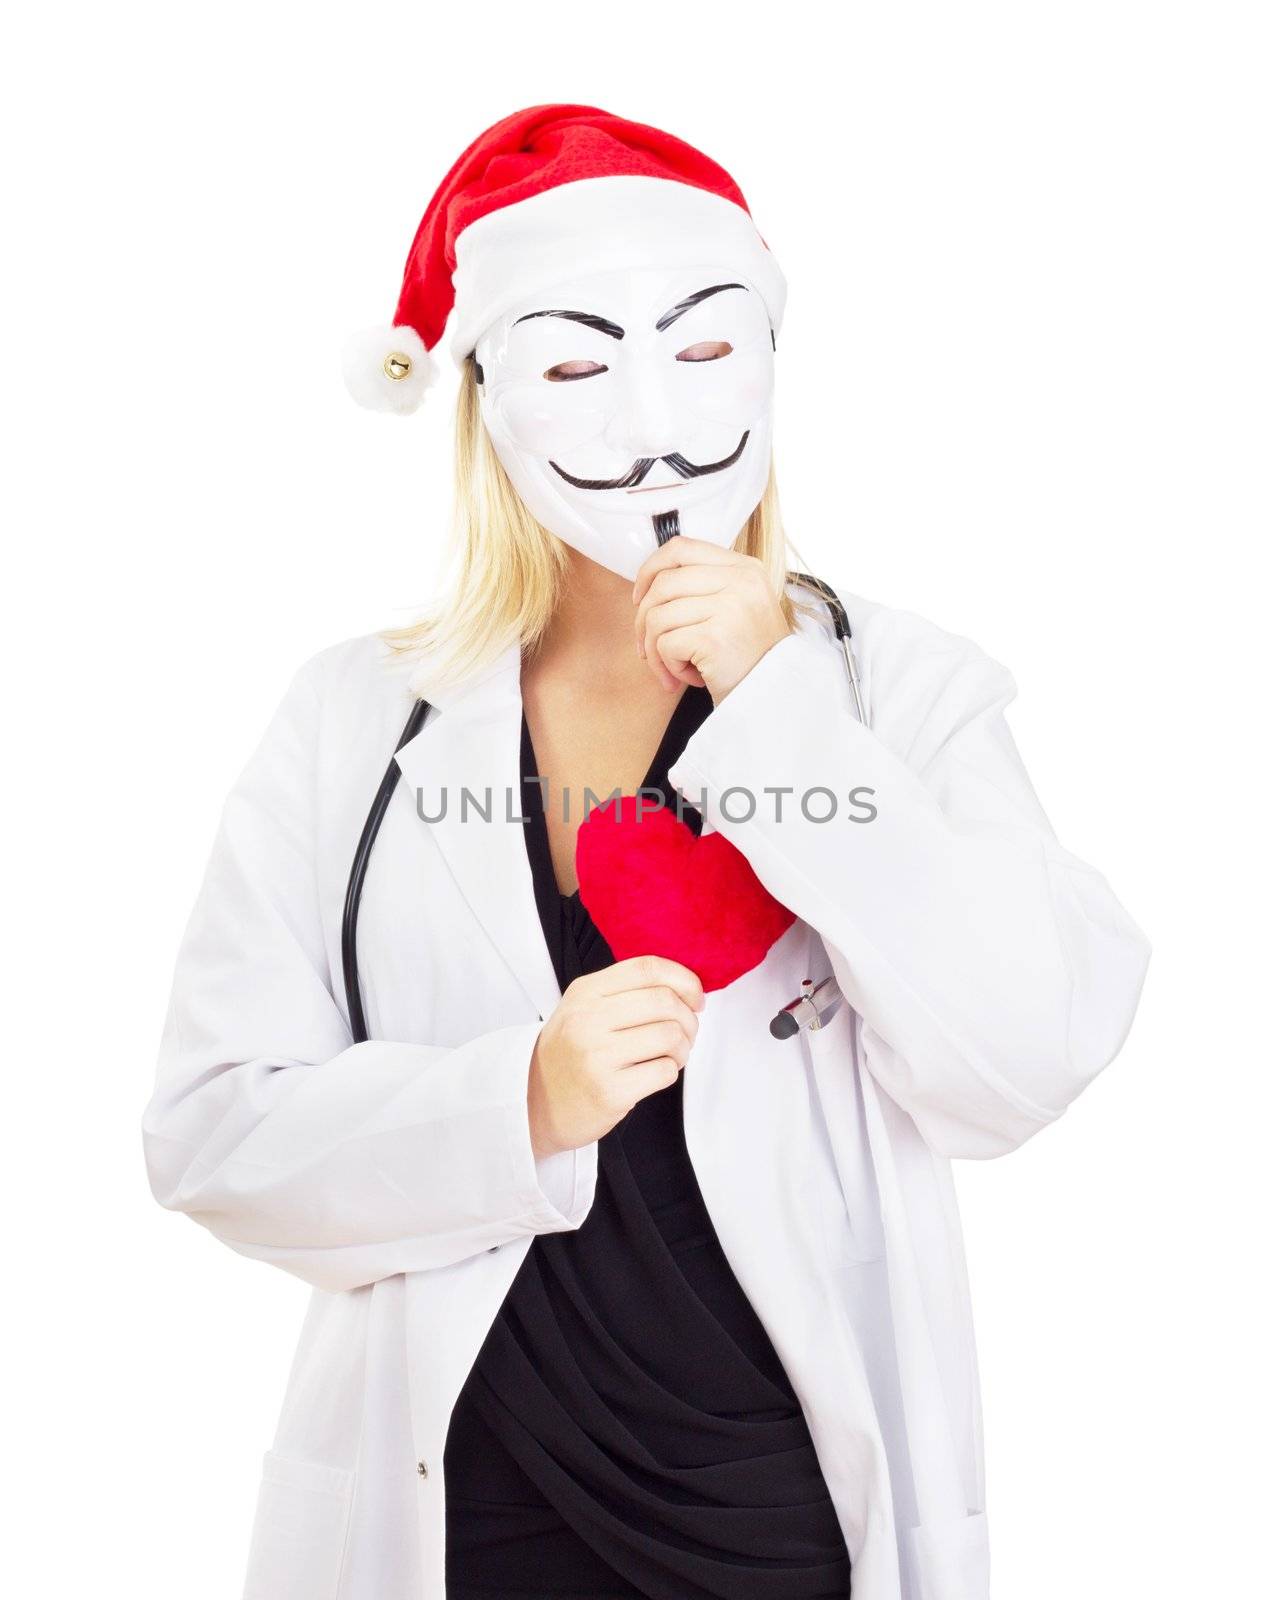 Medical doctor with a guy fawkes mask